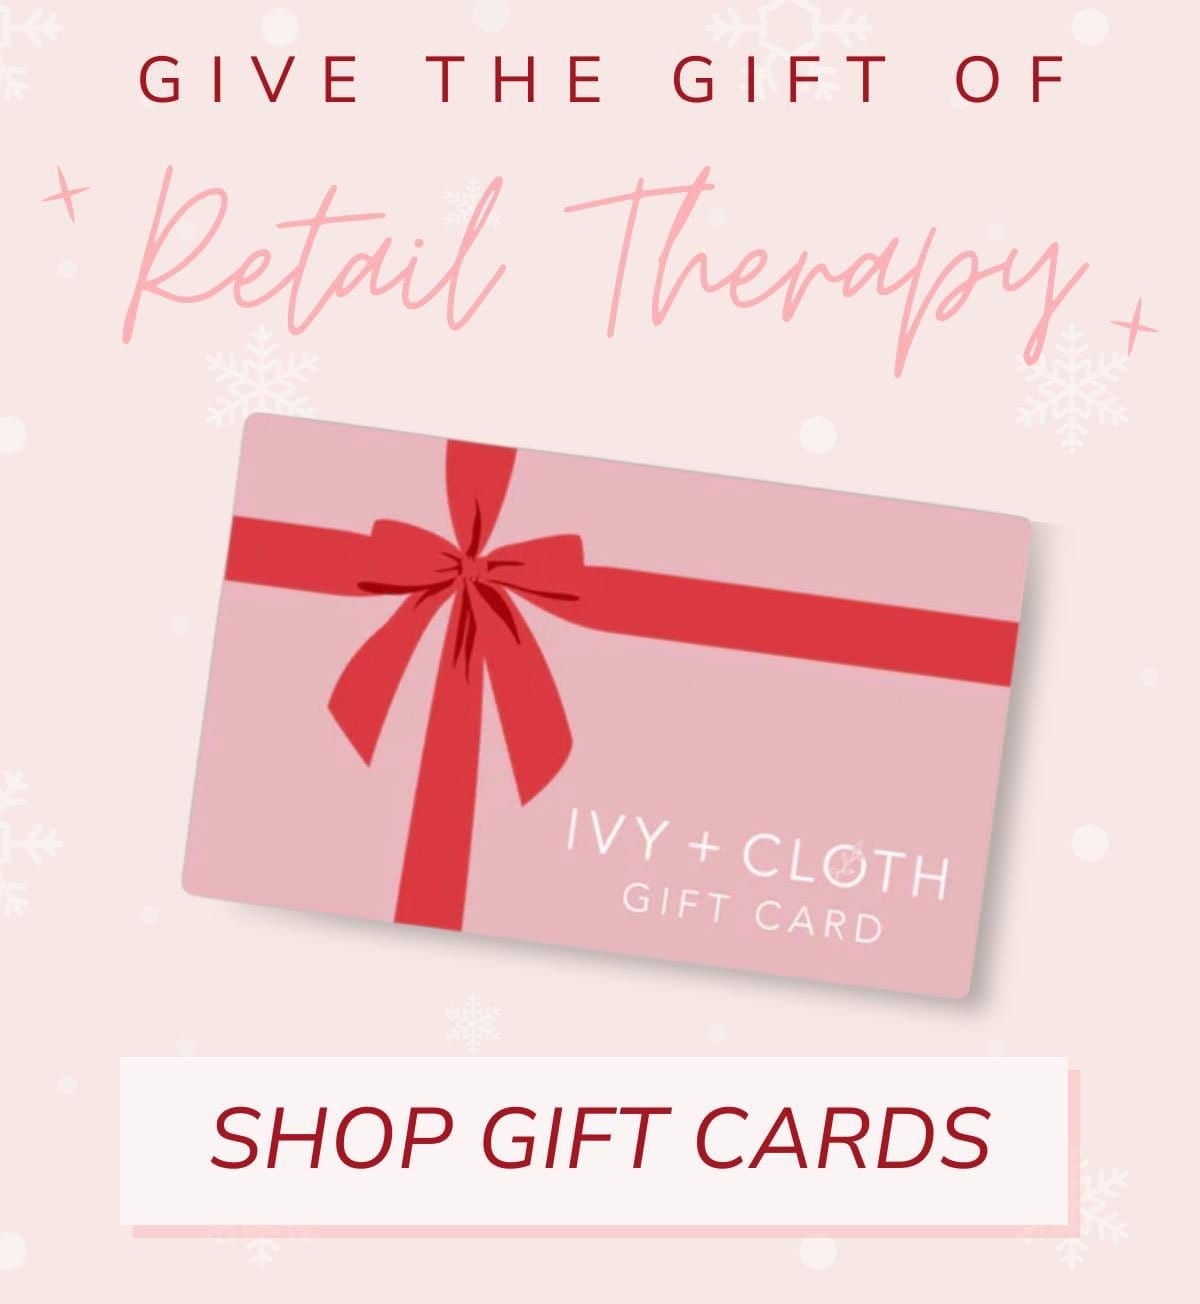 give the gift of retail therapy